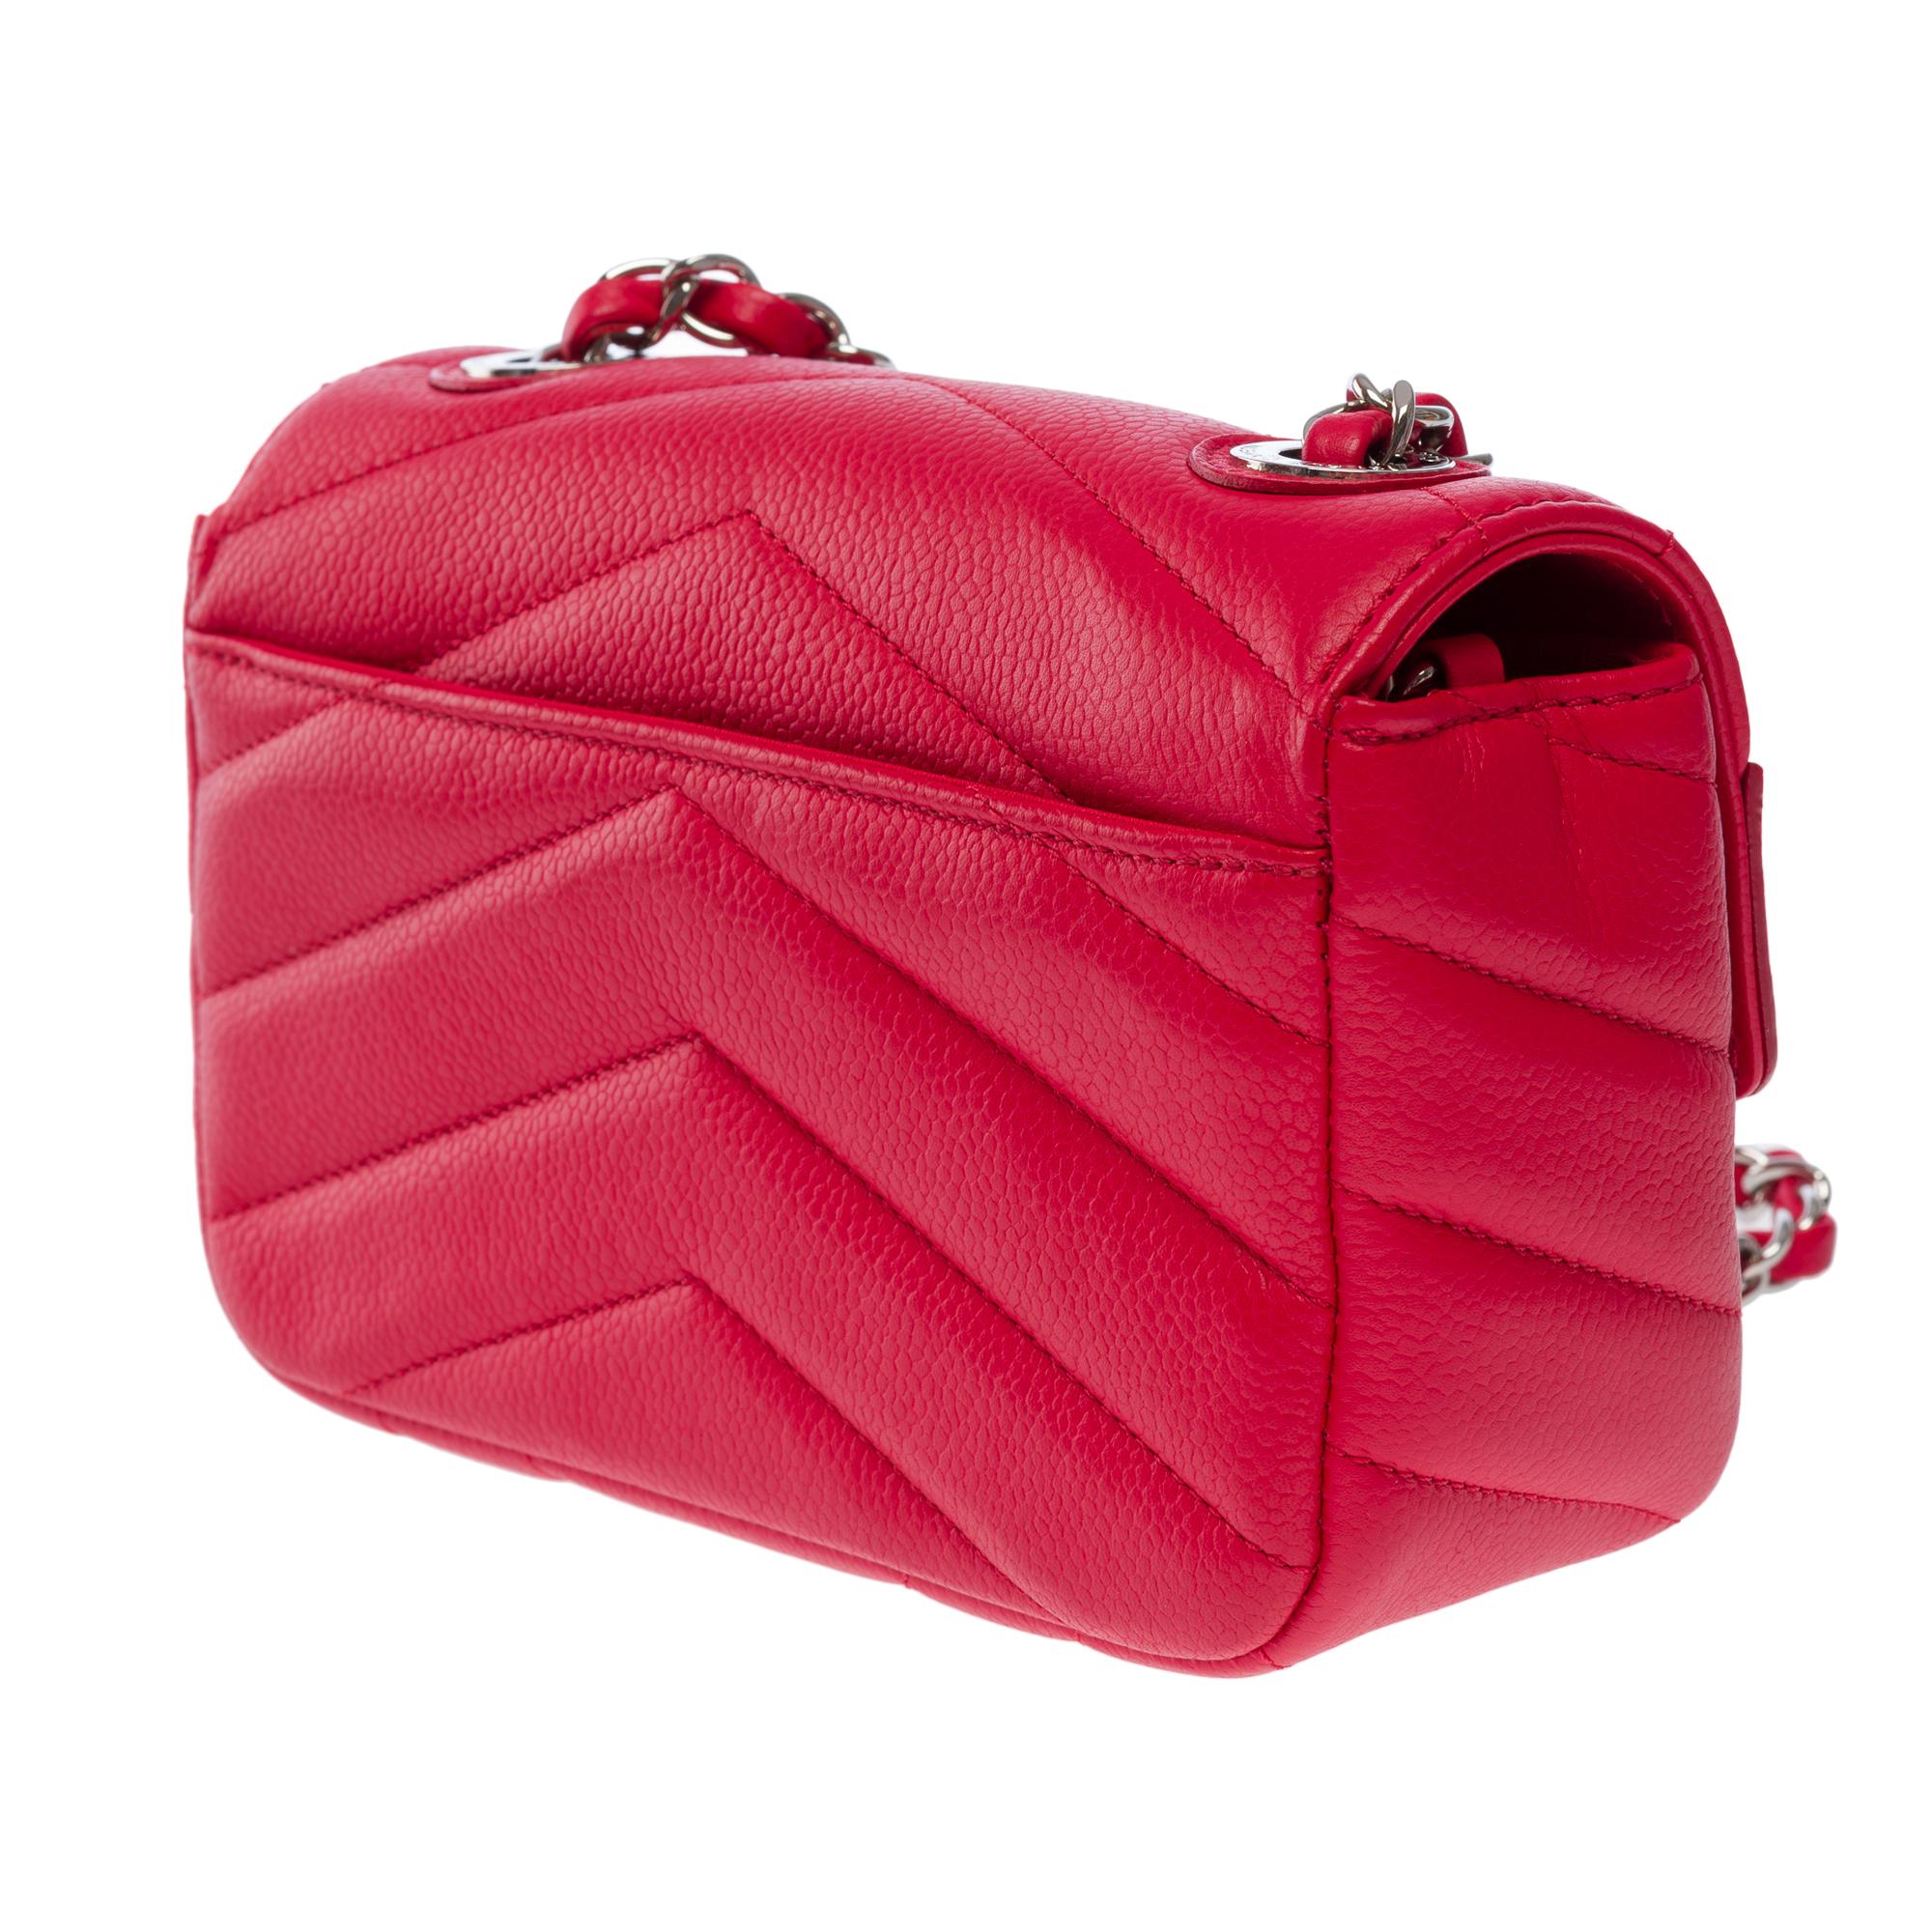 Chanel Mini Timeless shoulder bag in red herringbone quilted caviar leather, SHW For Sale 1